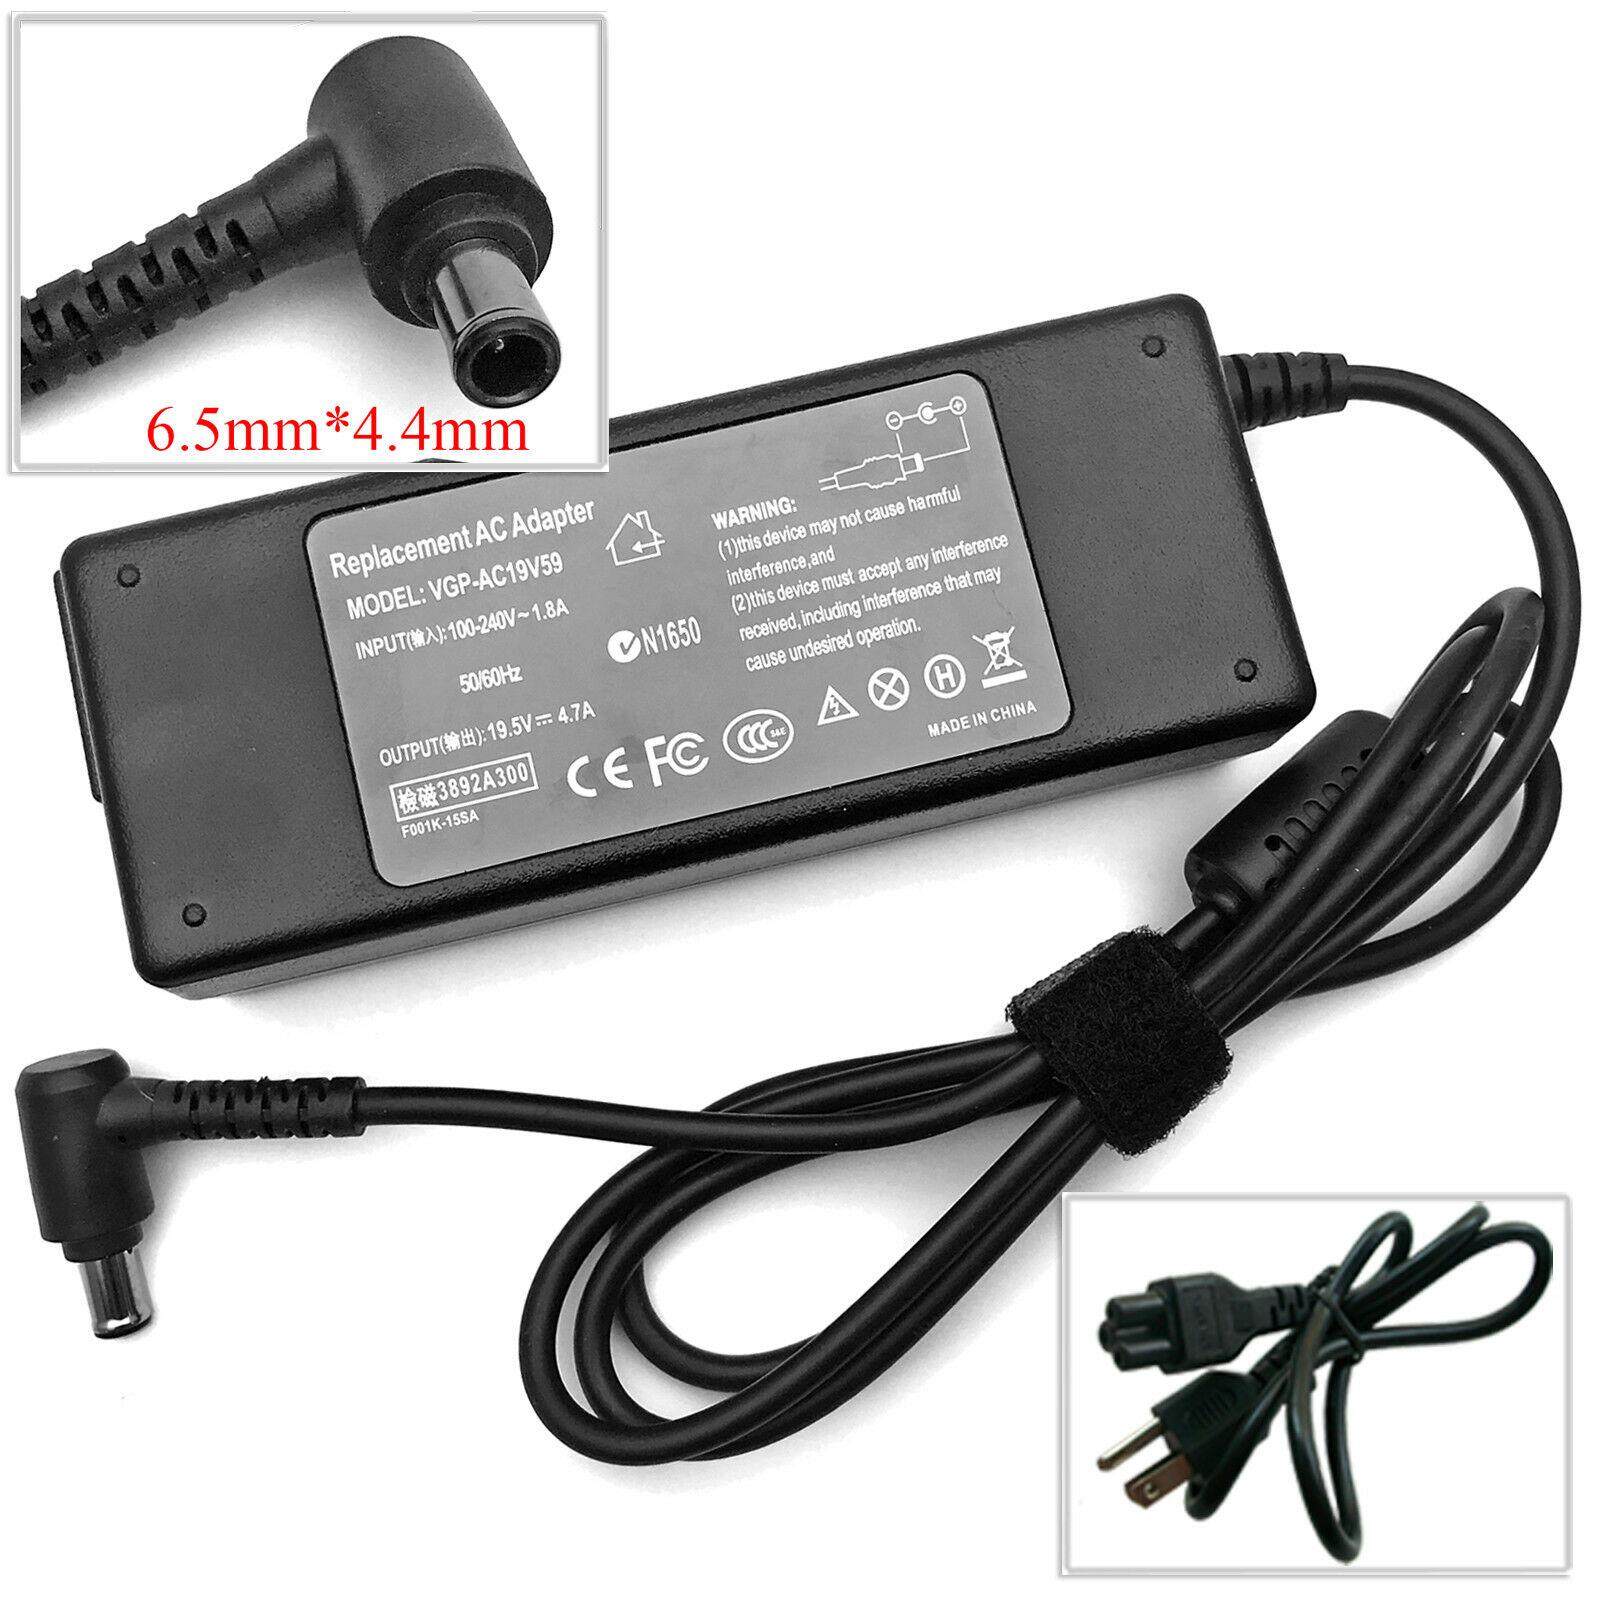 yan Car Charger AC/DC Wall Power Adapter for JVC Everio GZ-HM35 AU/S GZ-HM35BU/S 